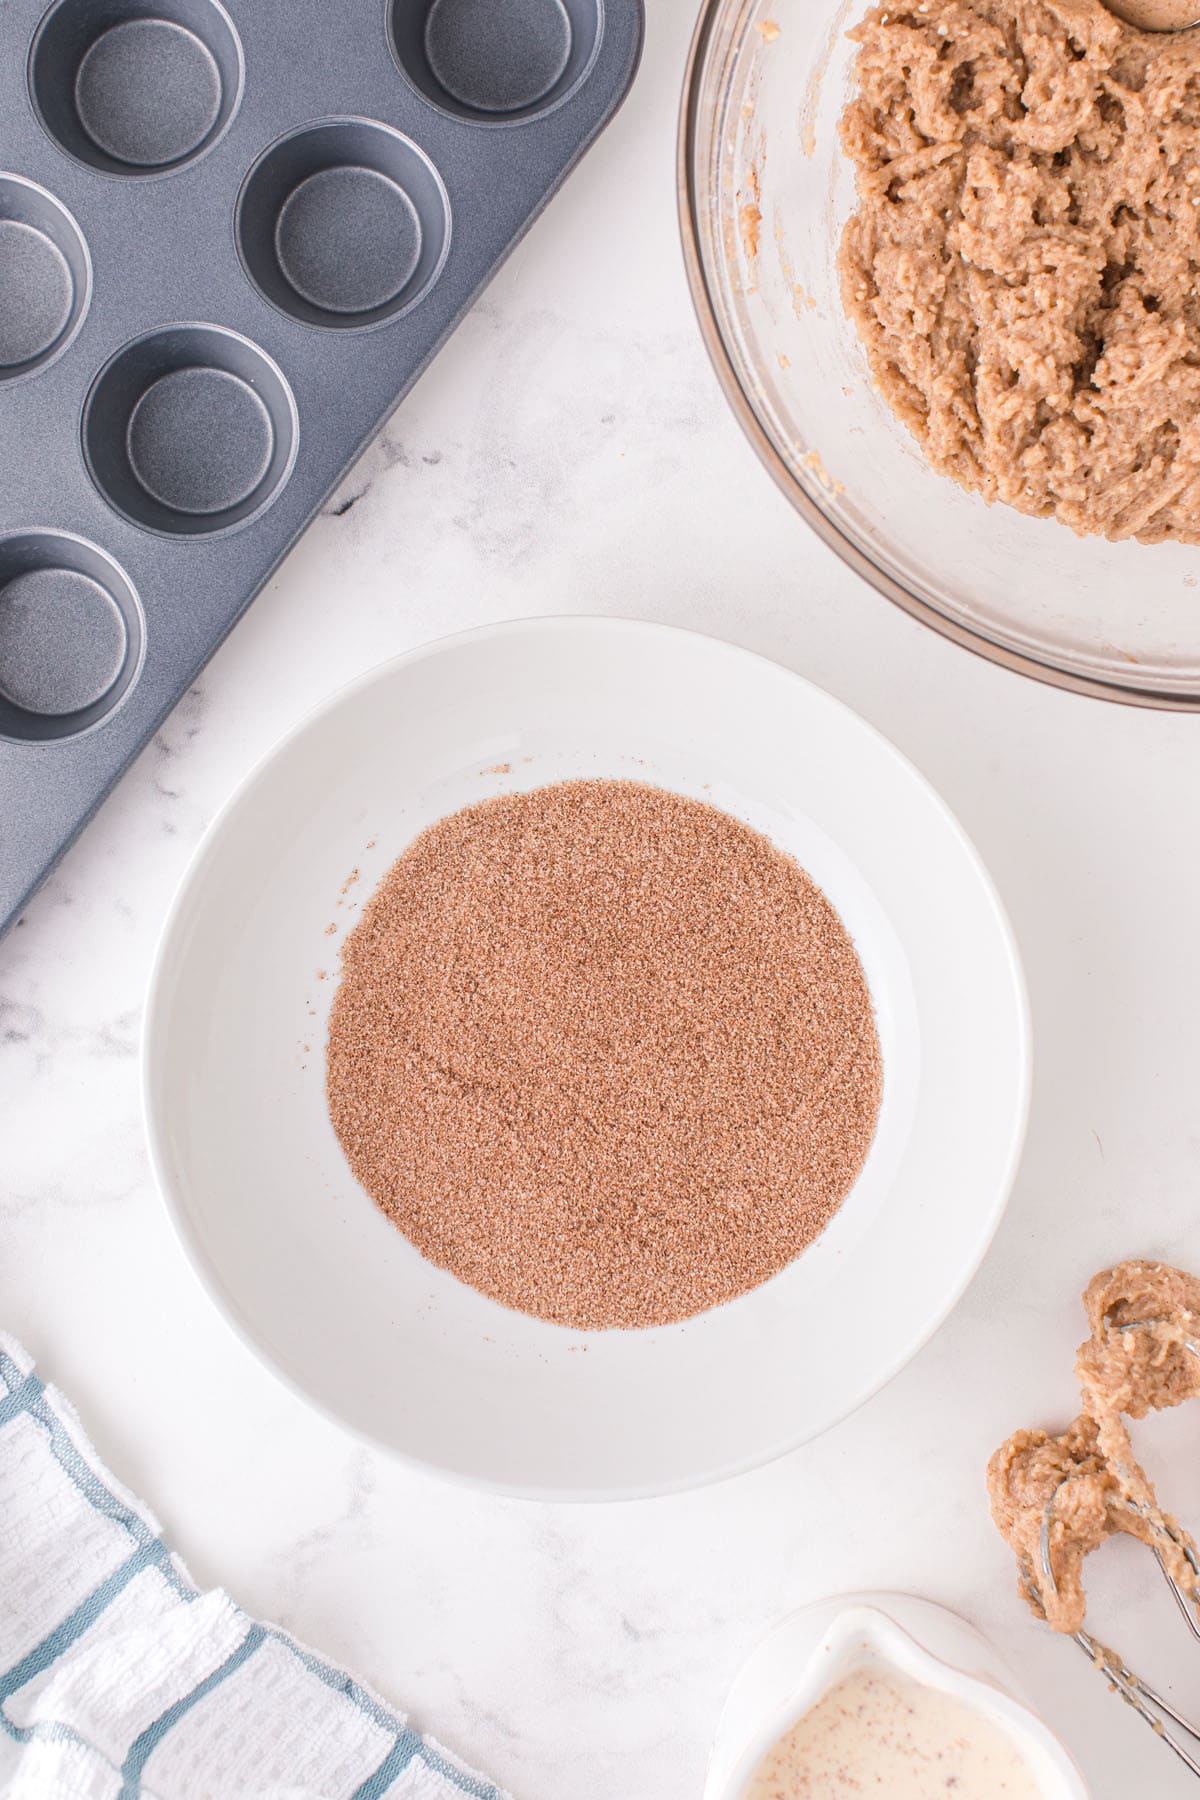 mix together the pumpkin pie spice and cinnamon sugar.